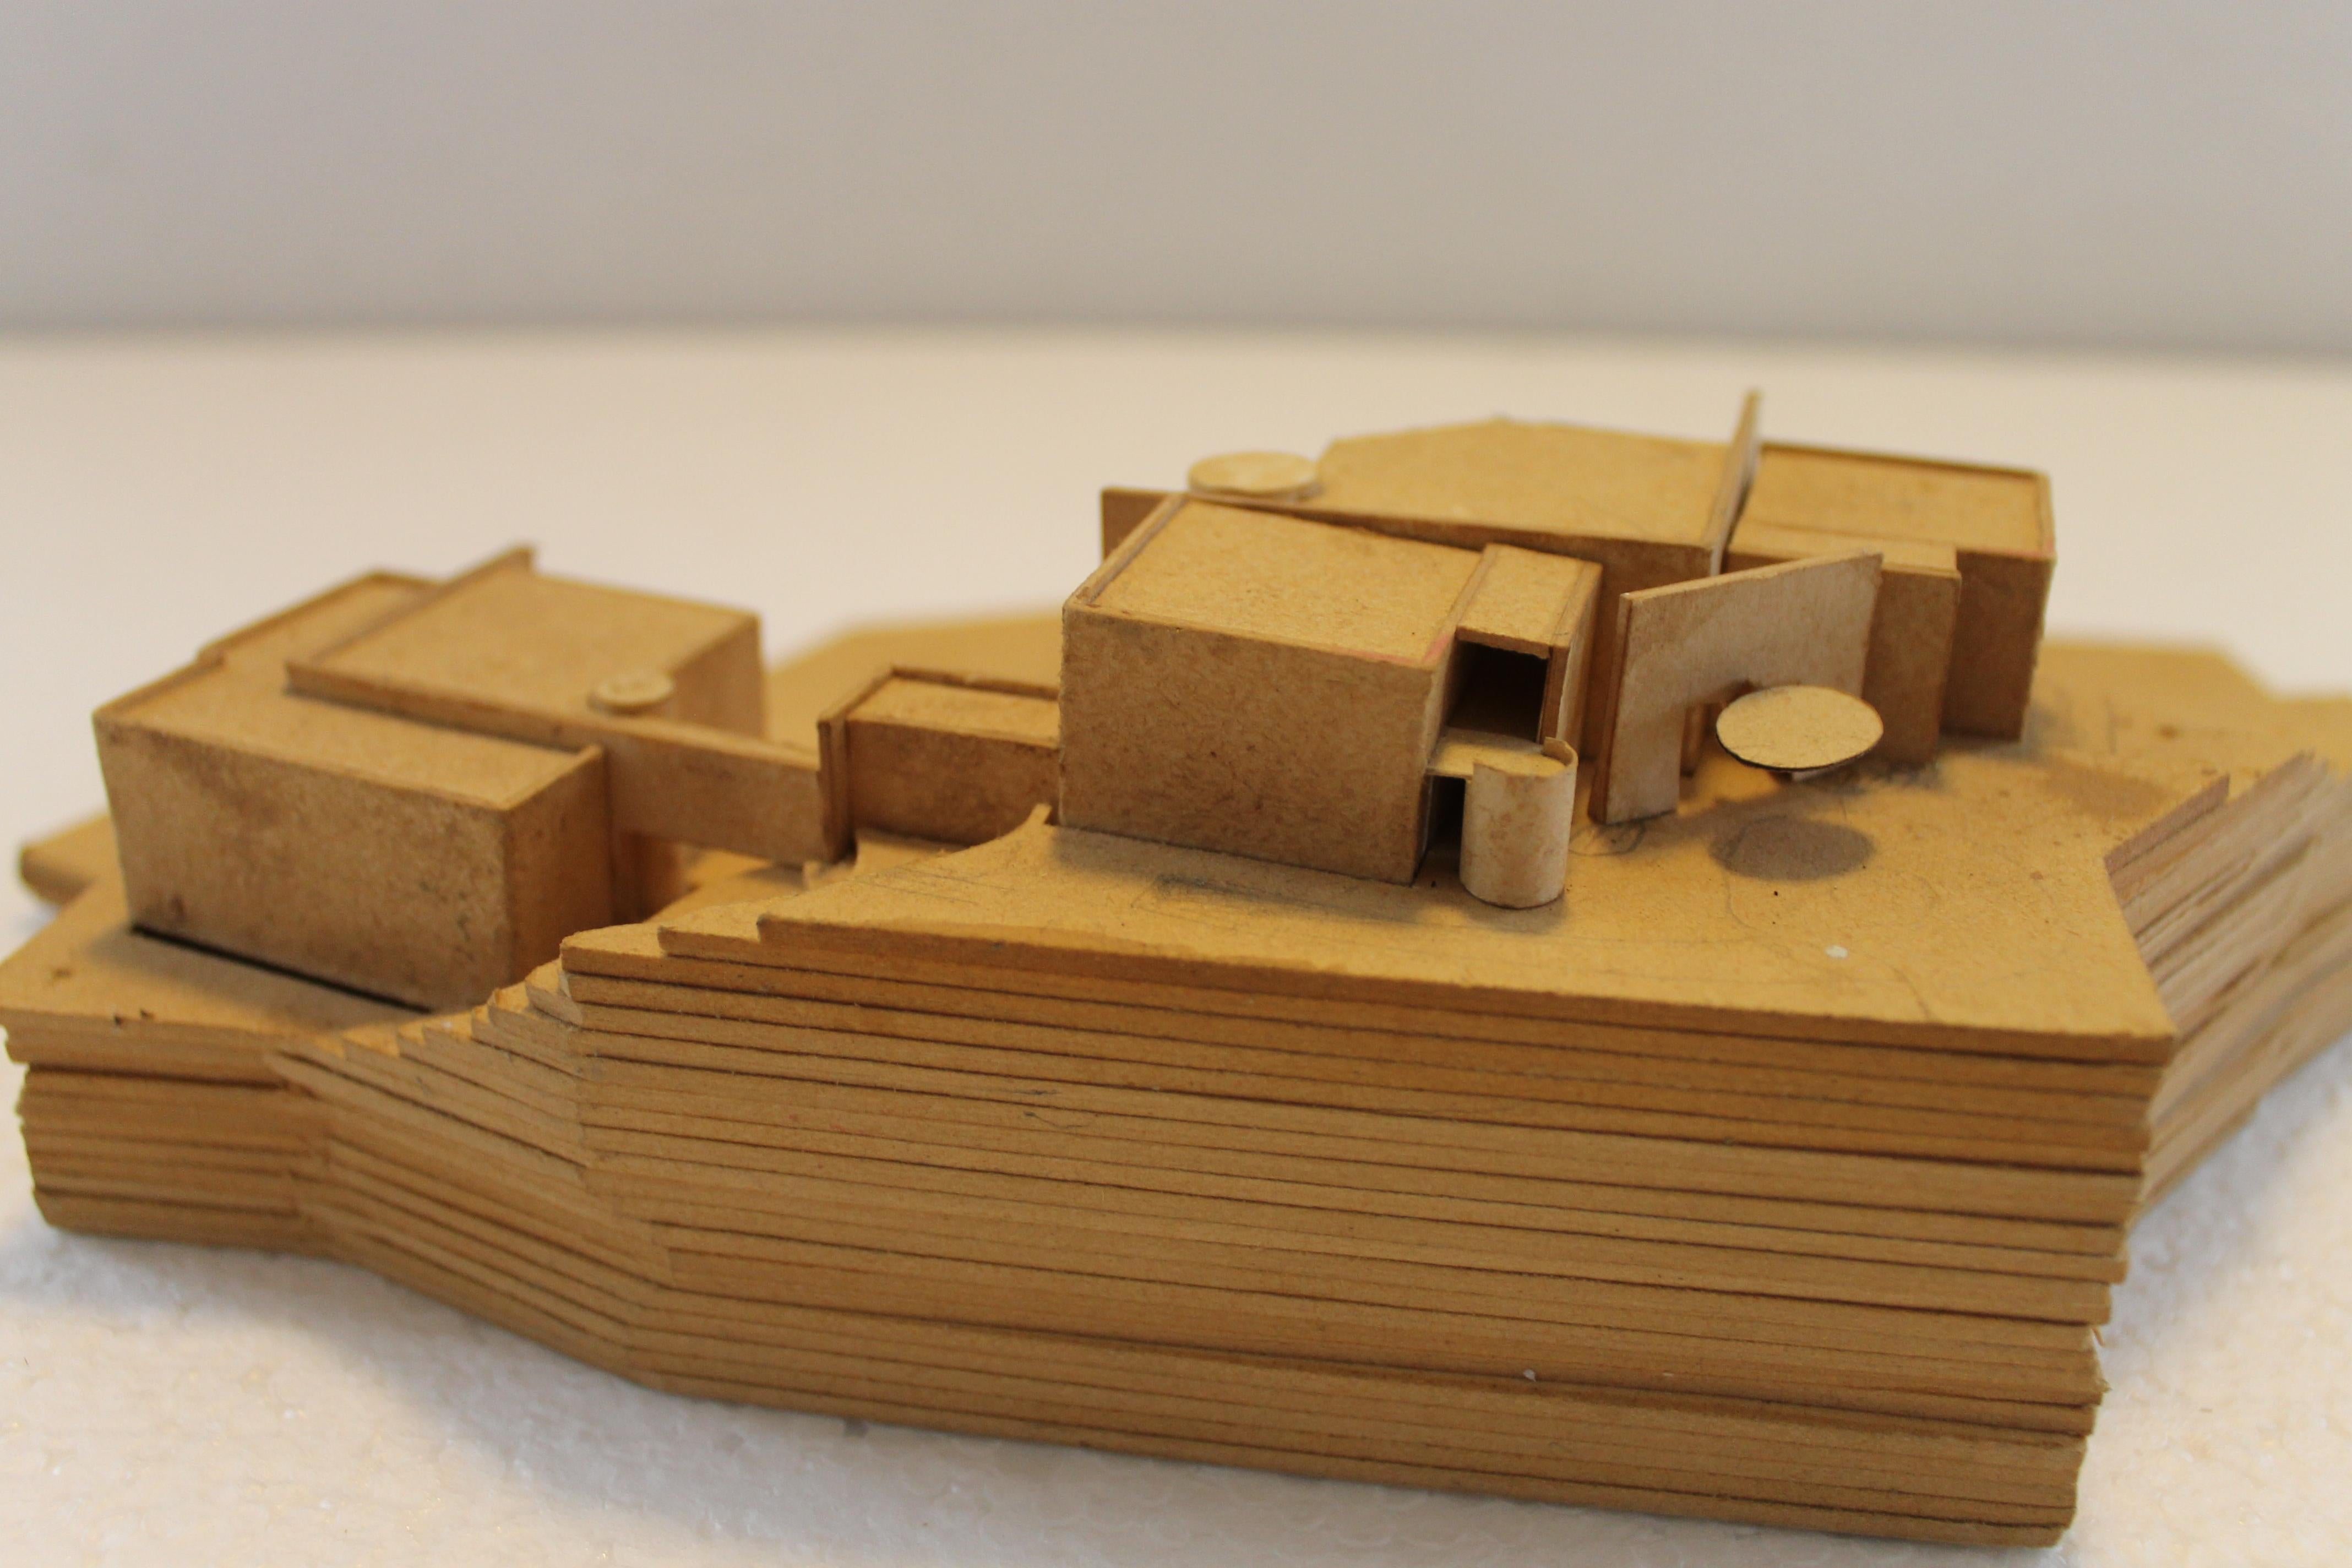 Afra and Tobia Scarpa Model 'Maquette' of Aobadai House, Tokyo 'Japan' 1995 For Sale 2